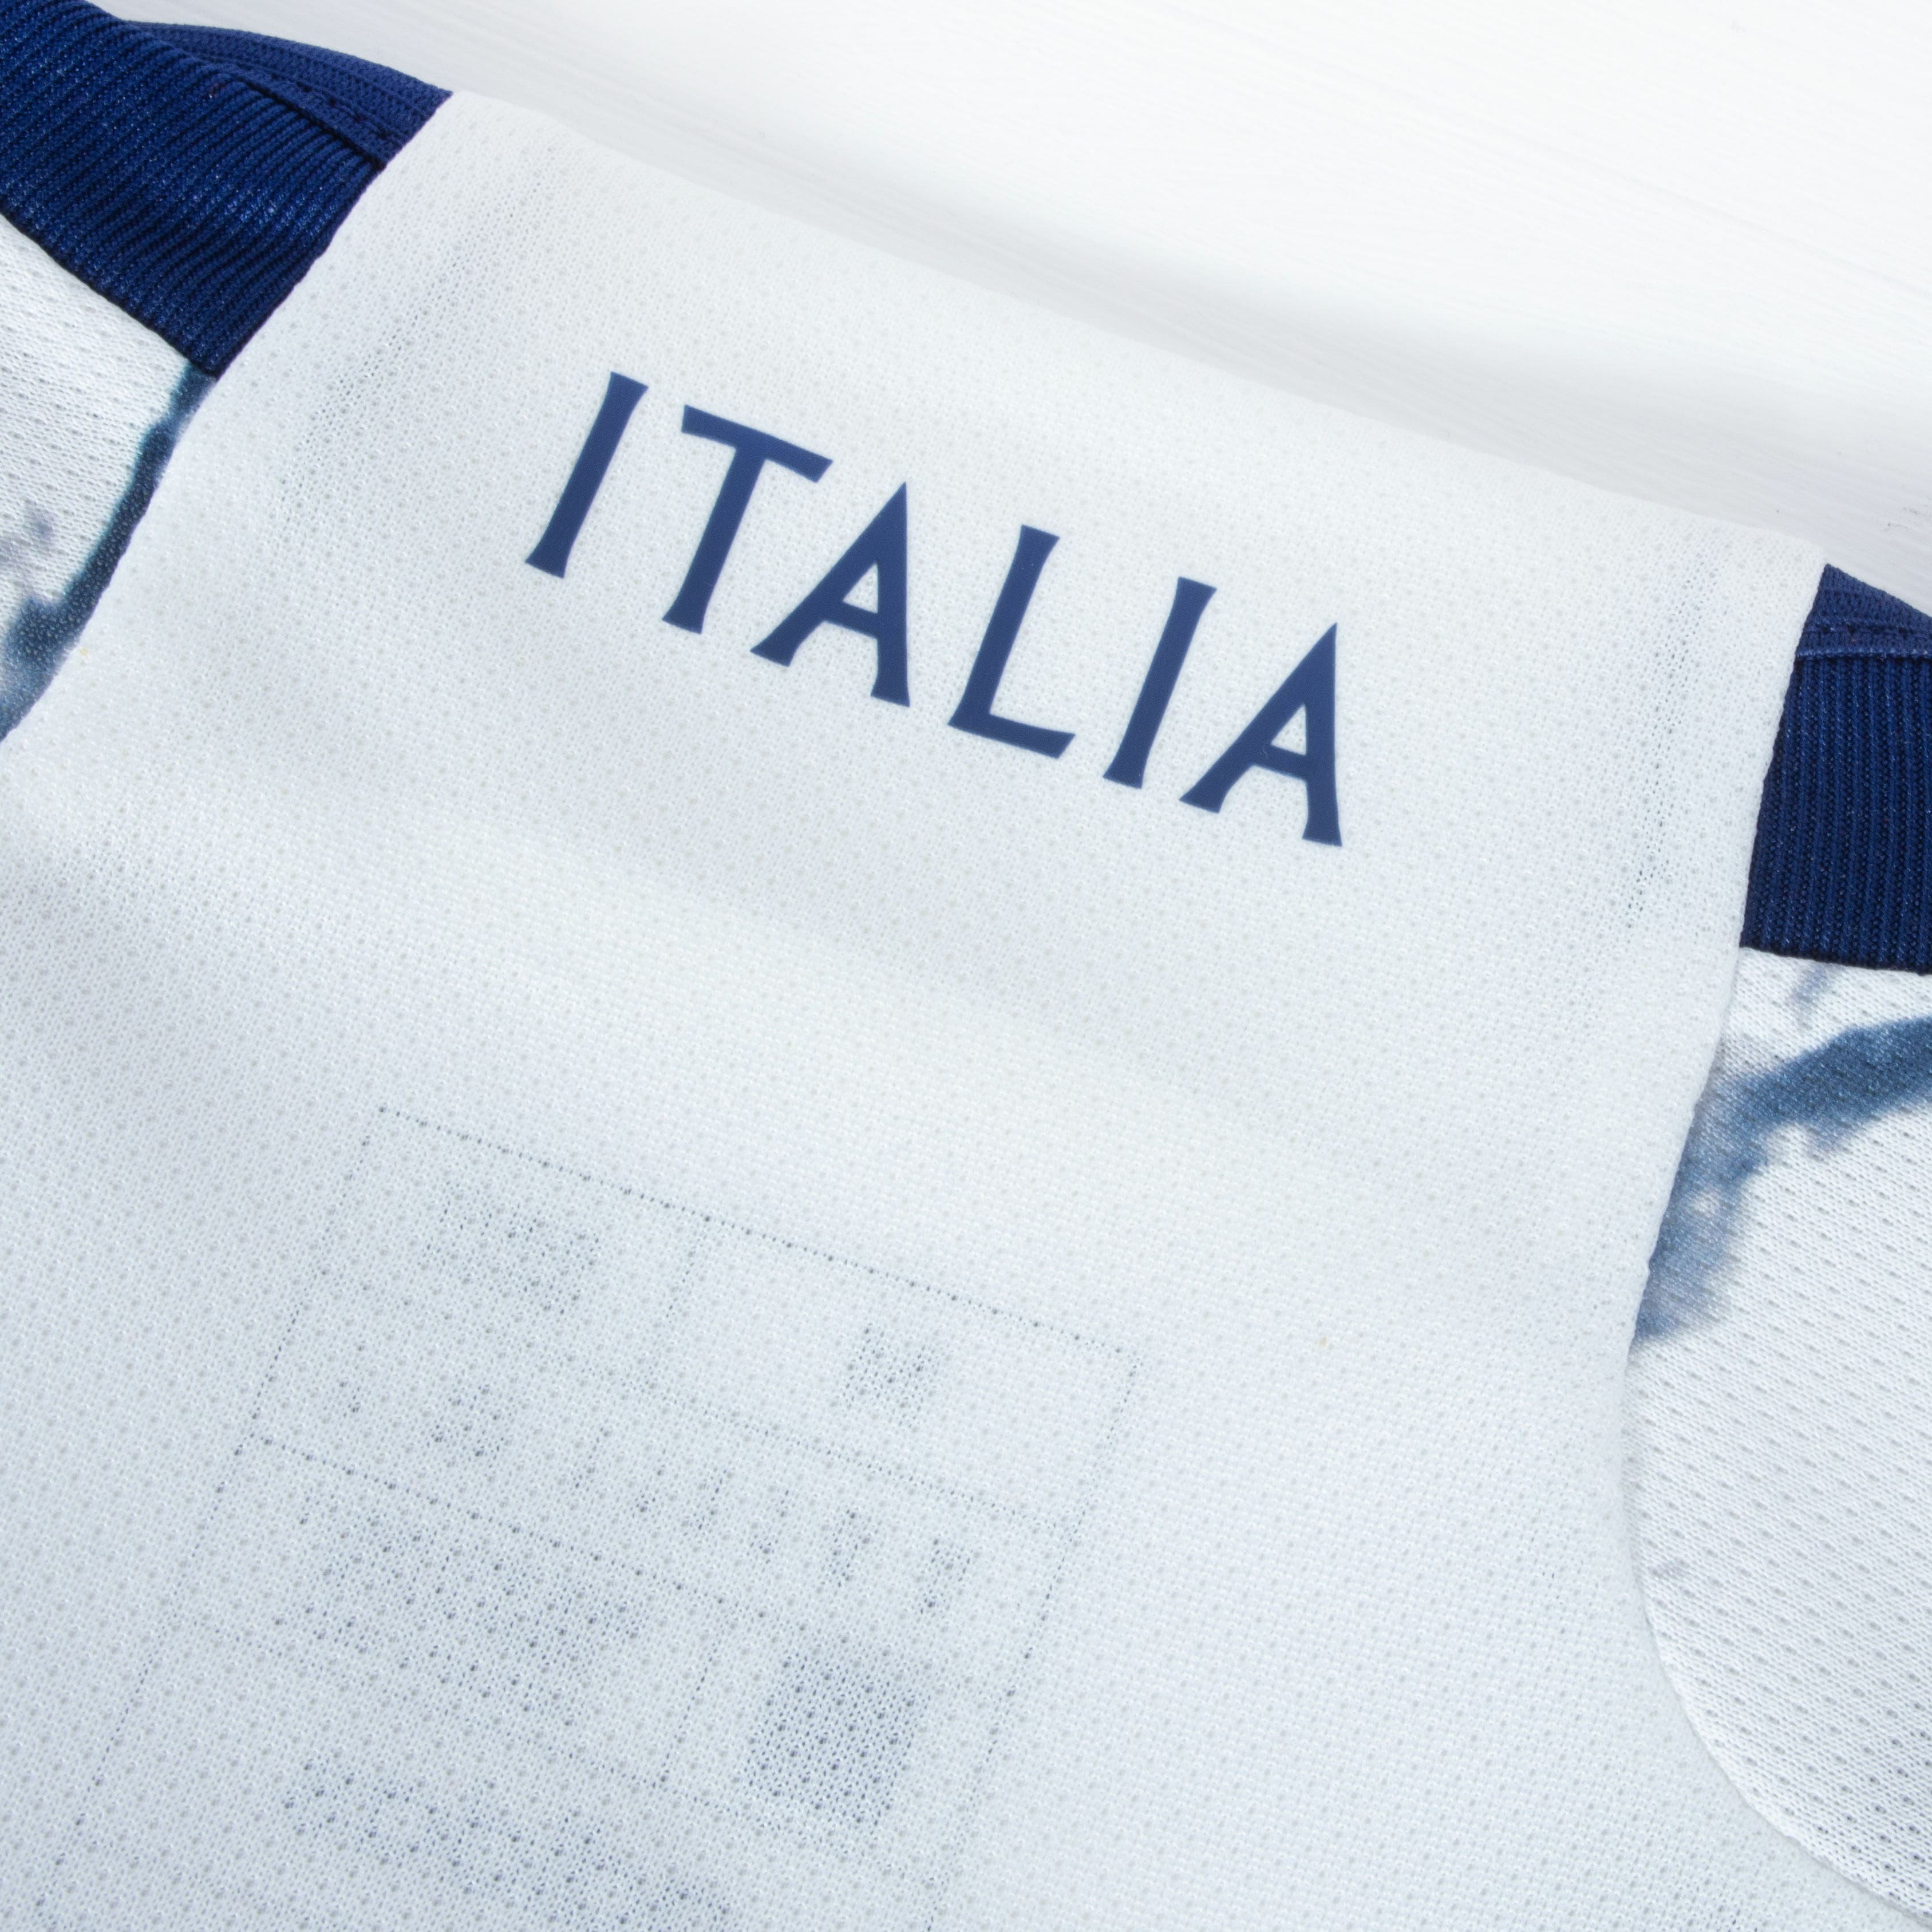 Italy Away Jersey 22/23 Euro 2024 Qualification